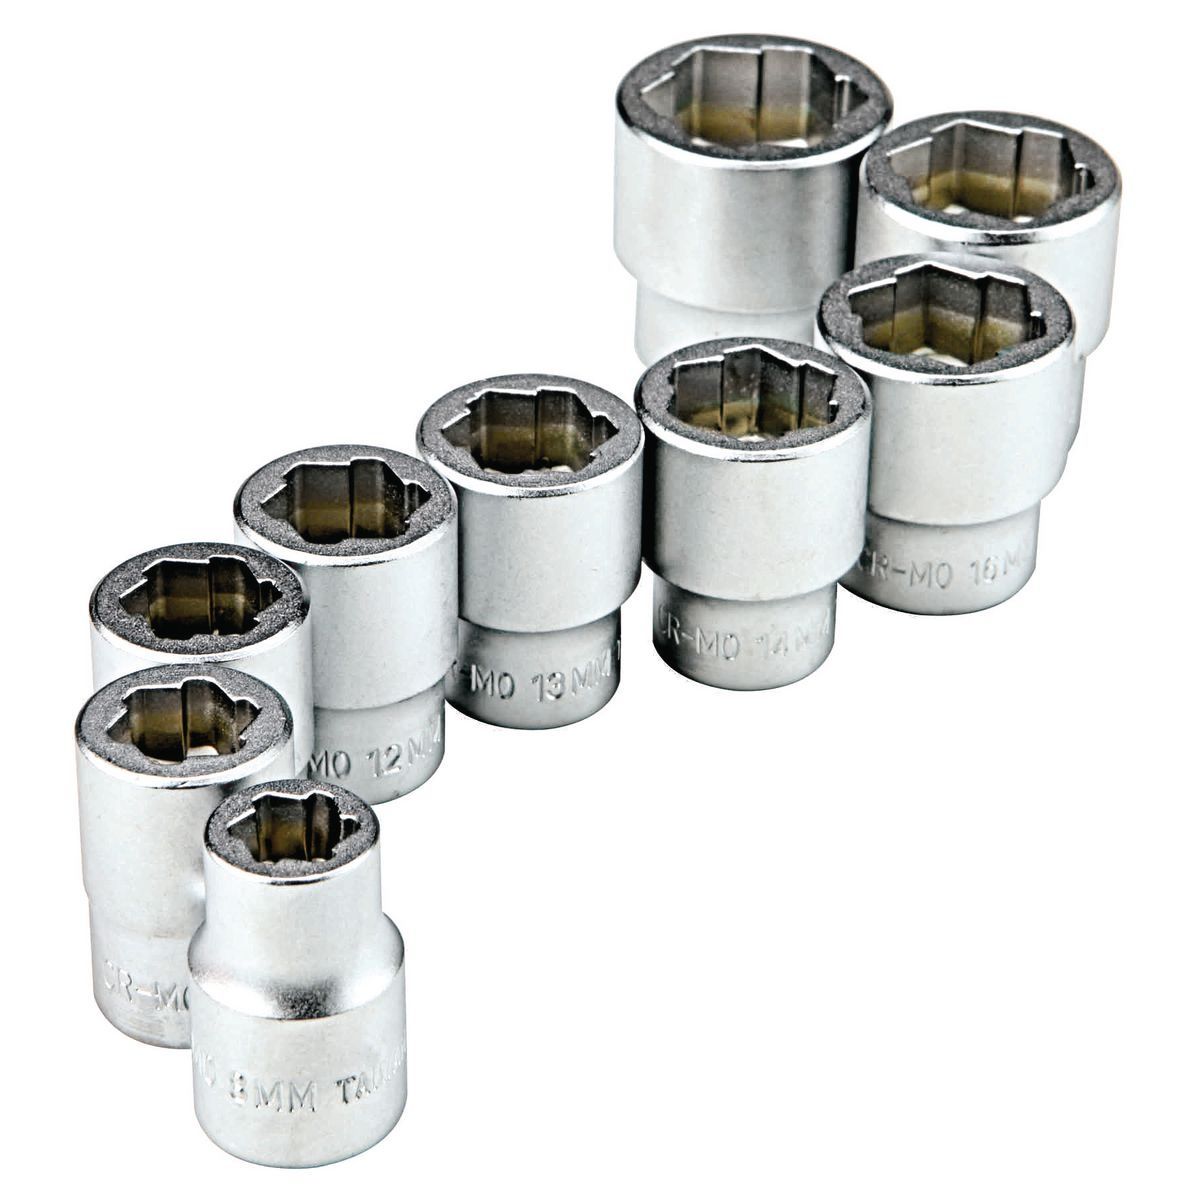 PITTSBURGH PRO 3/8 in. Drive Metric Bolt Extractor Socket Set, 9 Piece